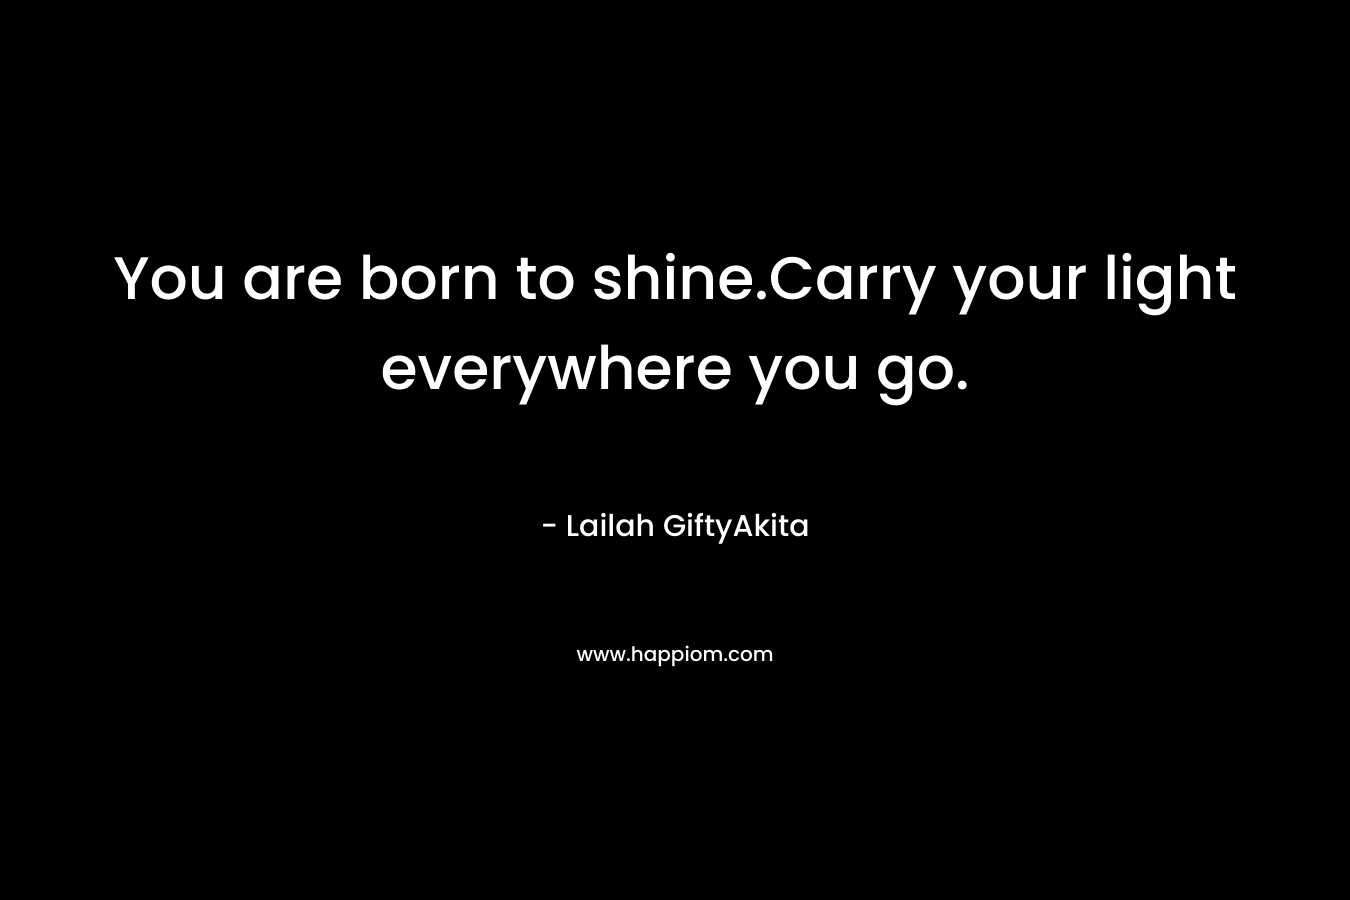 You are born to shine.Carry your light everywhere you go.